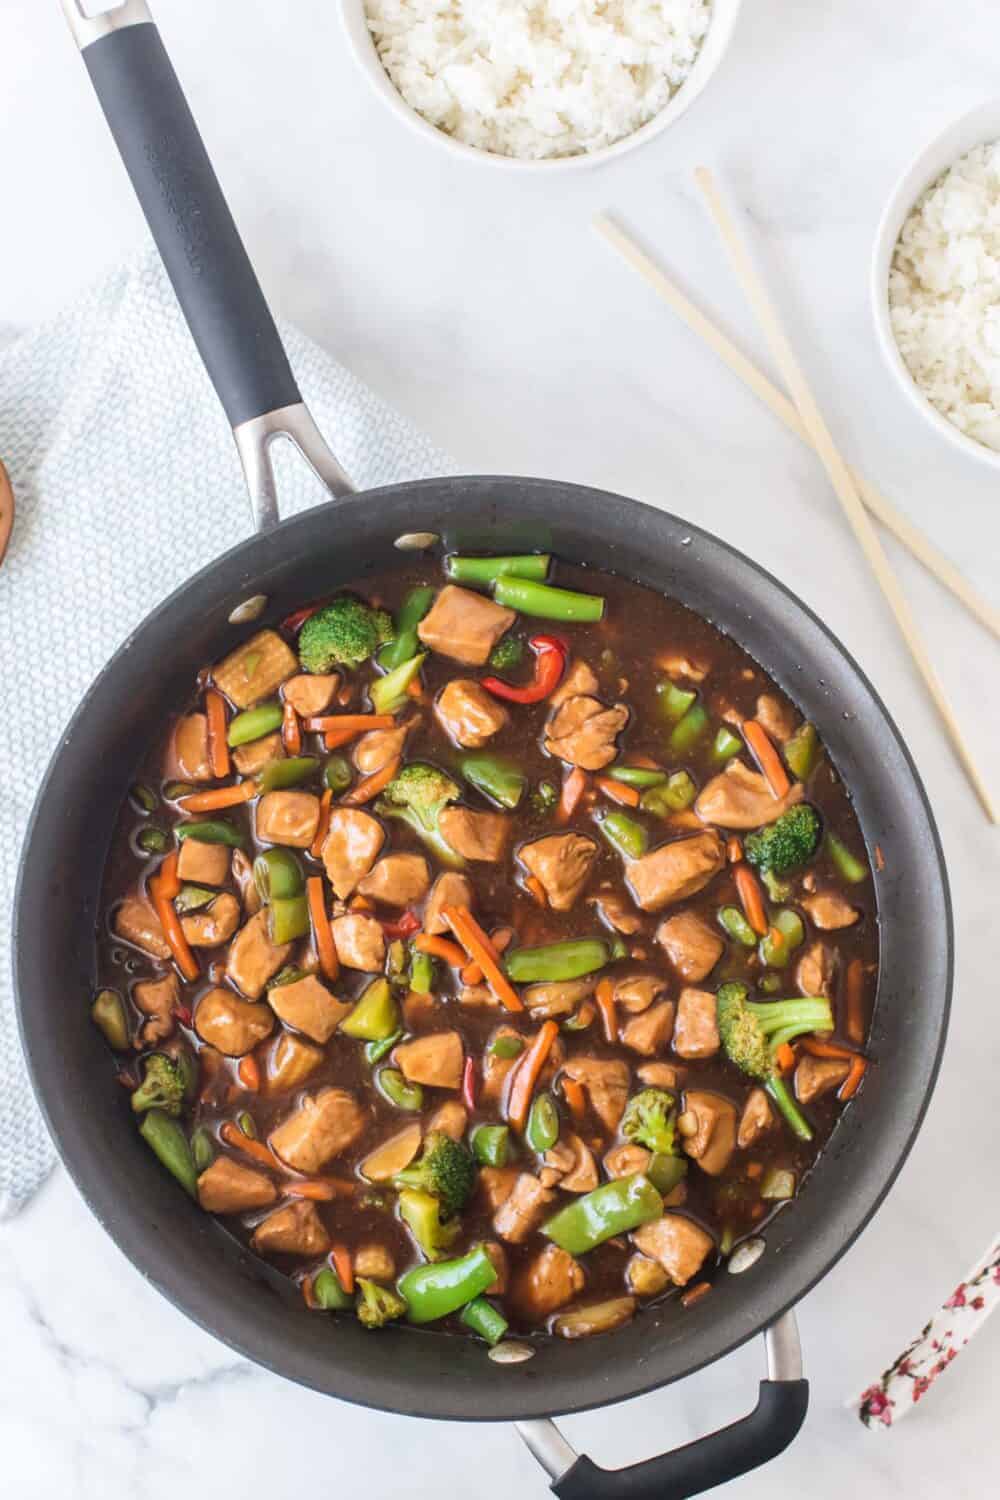 stir fry chicken and vegetables in a skillet next to chopsticks and bowls of white rice